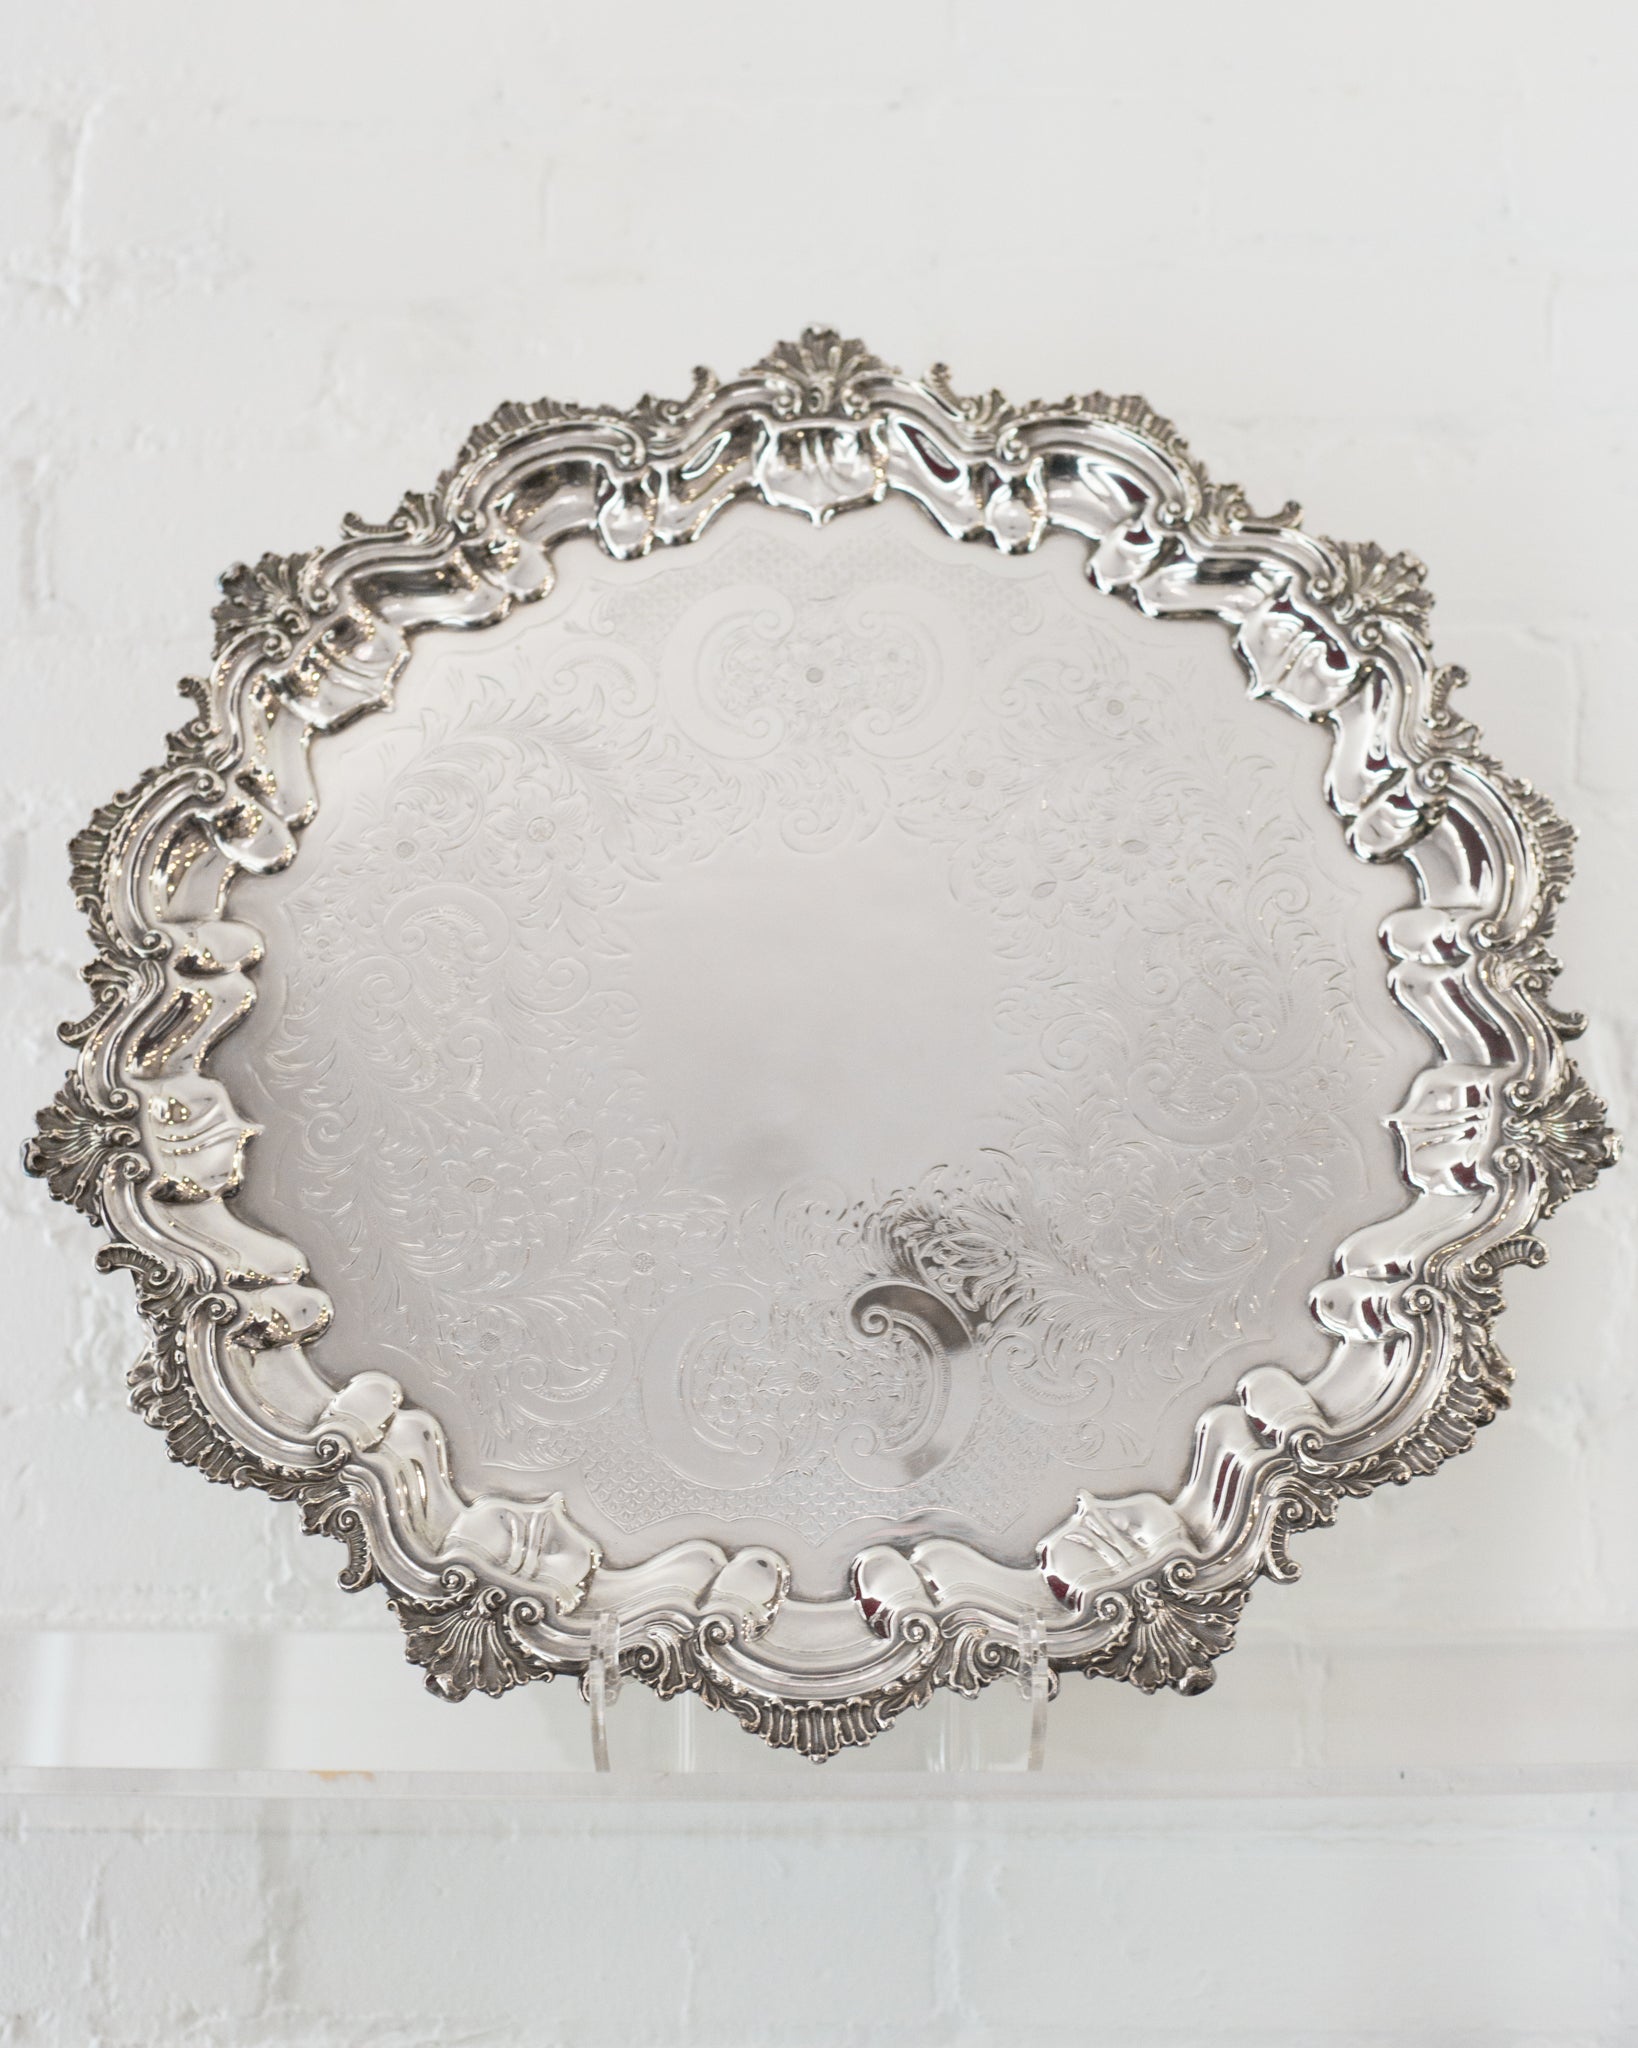 ANTIQUE LARGE SILVER PLATE TRAY WITH SCALLOPED EDGE ON FEET